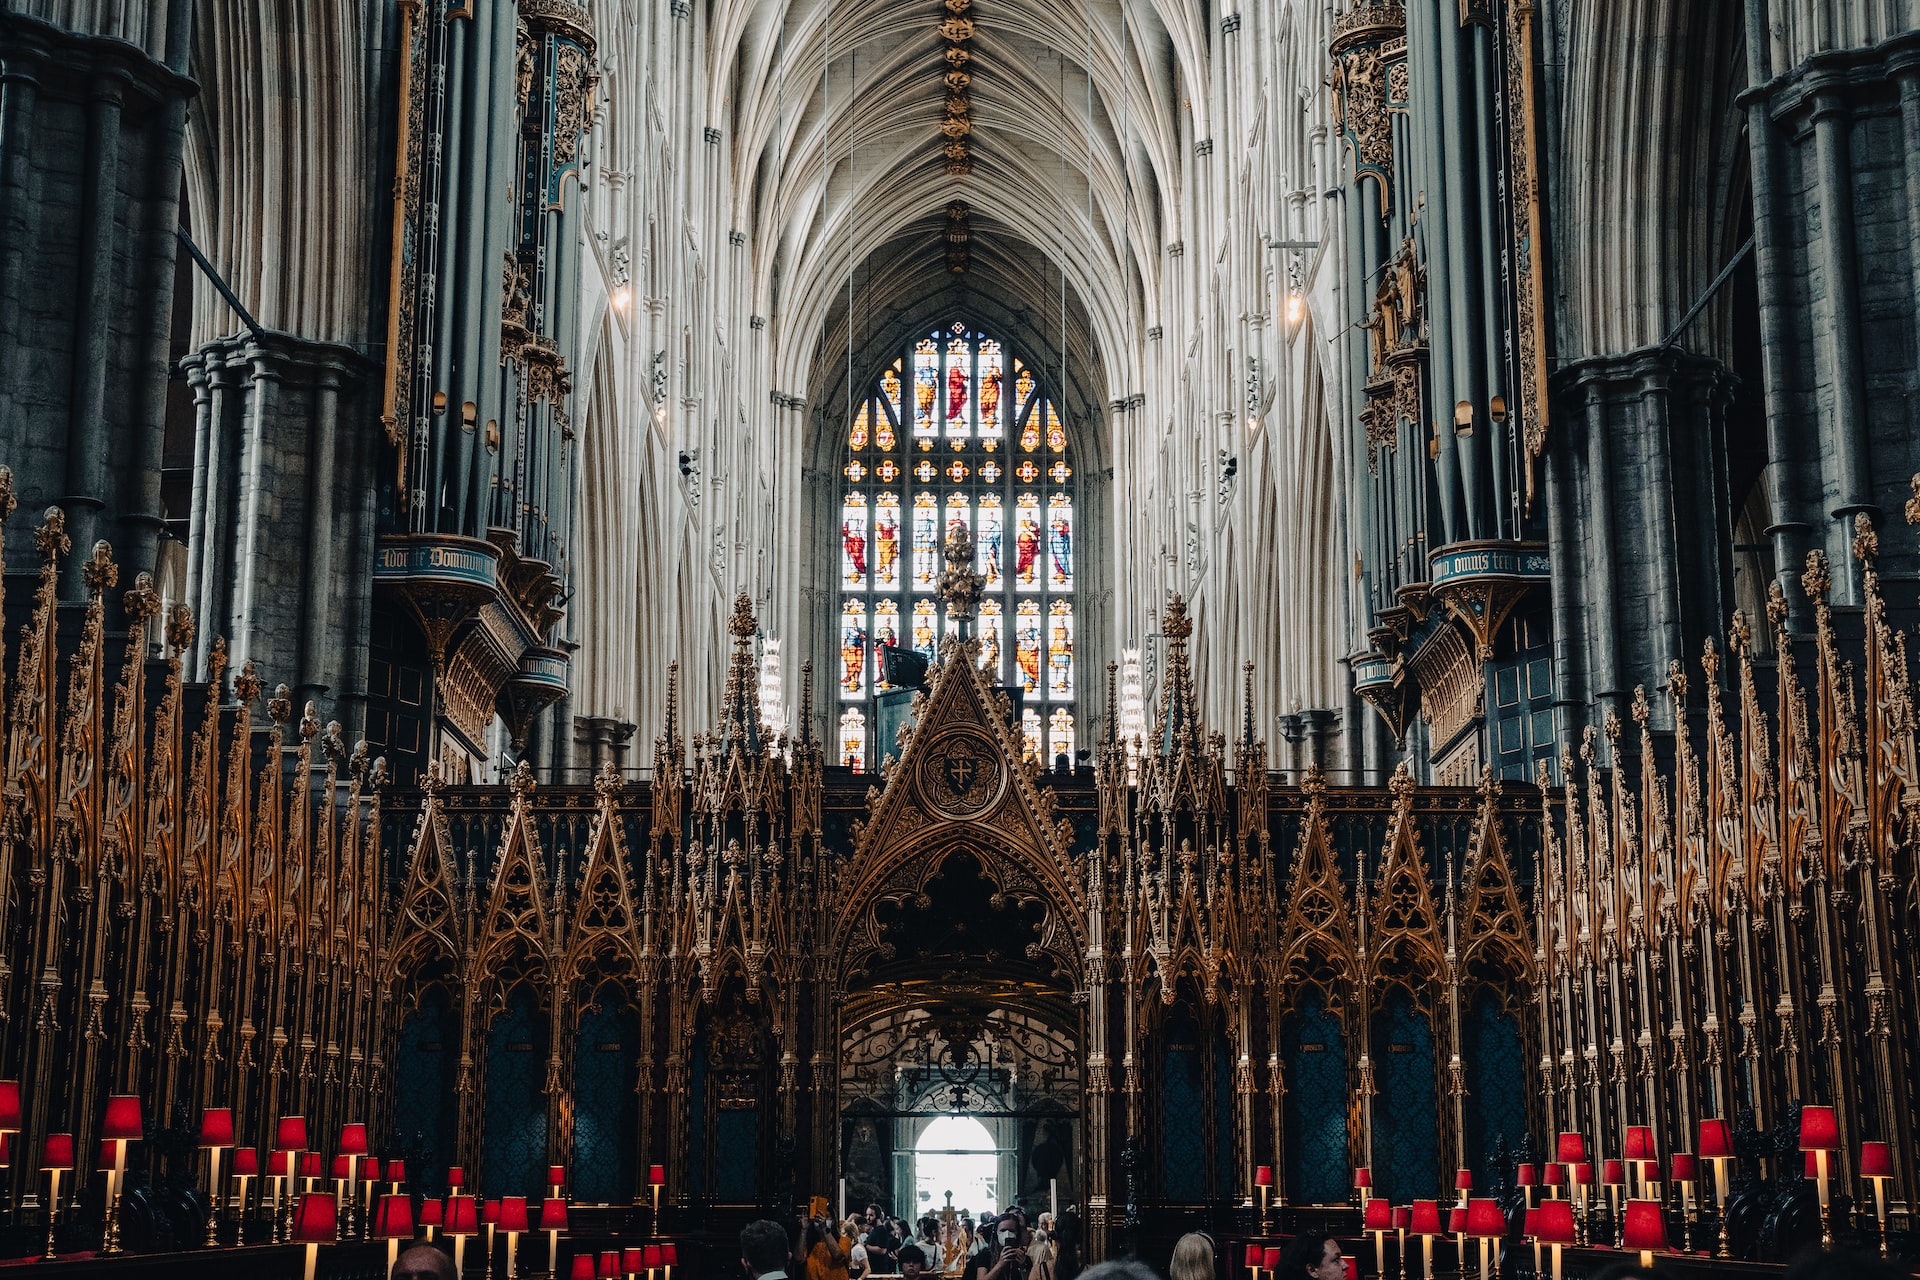 The stunning, expansive interior of Westminster Abbey.